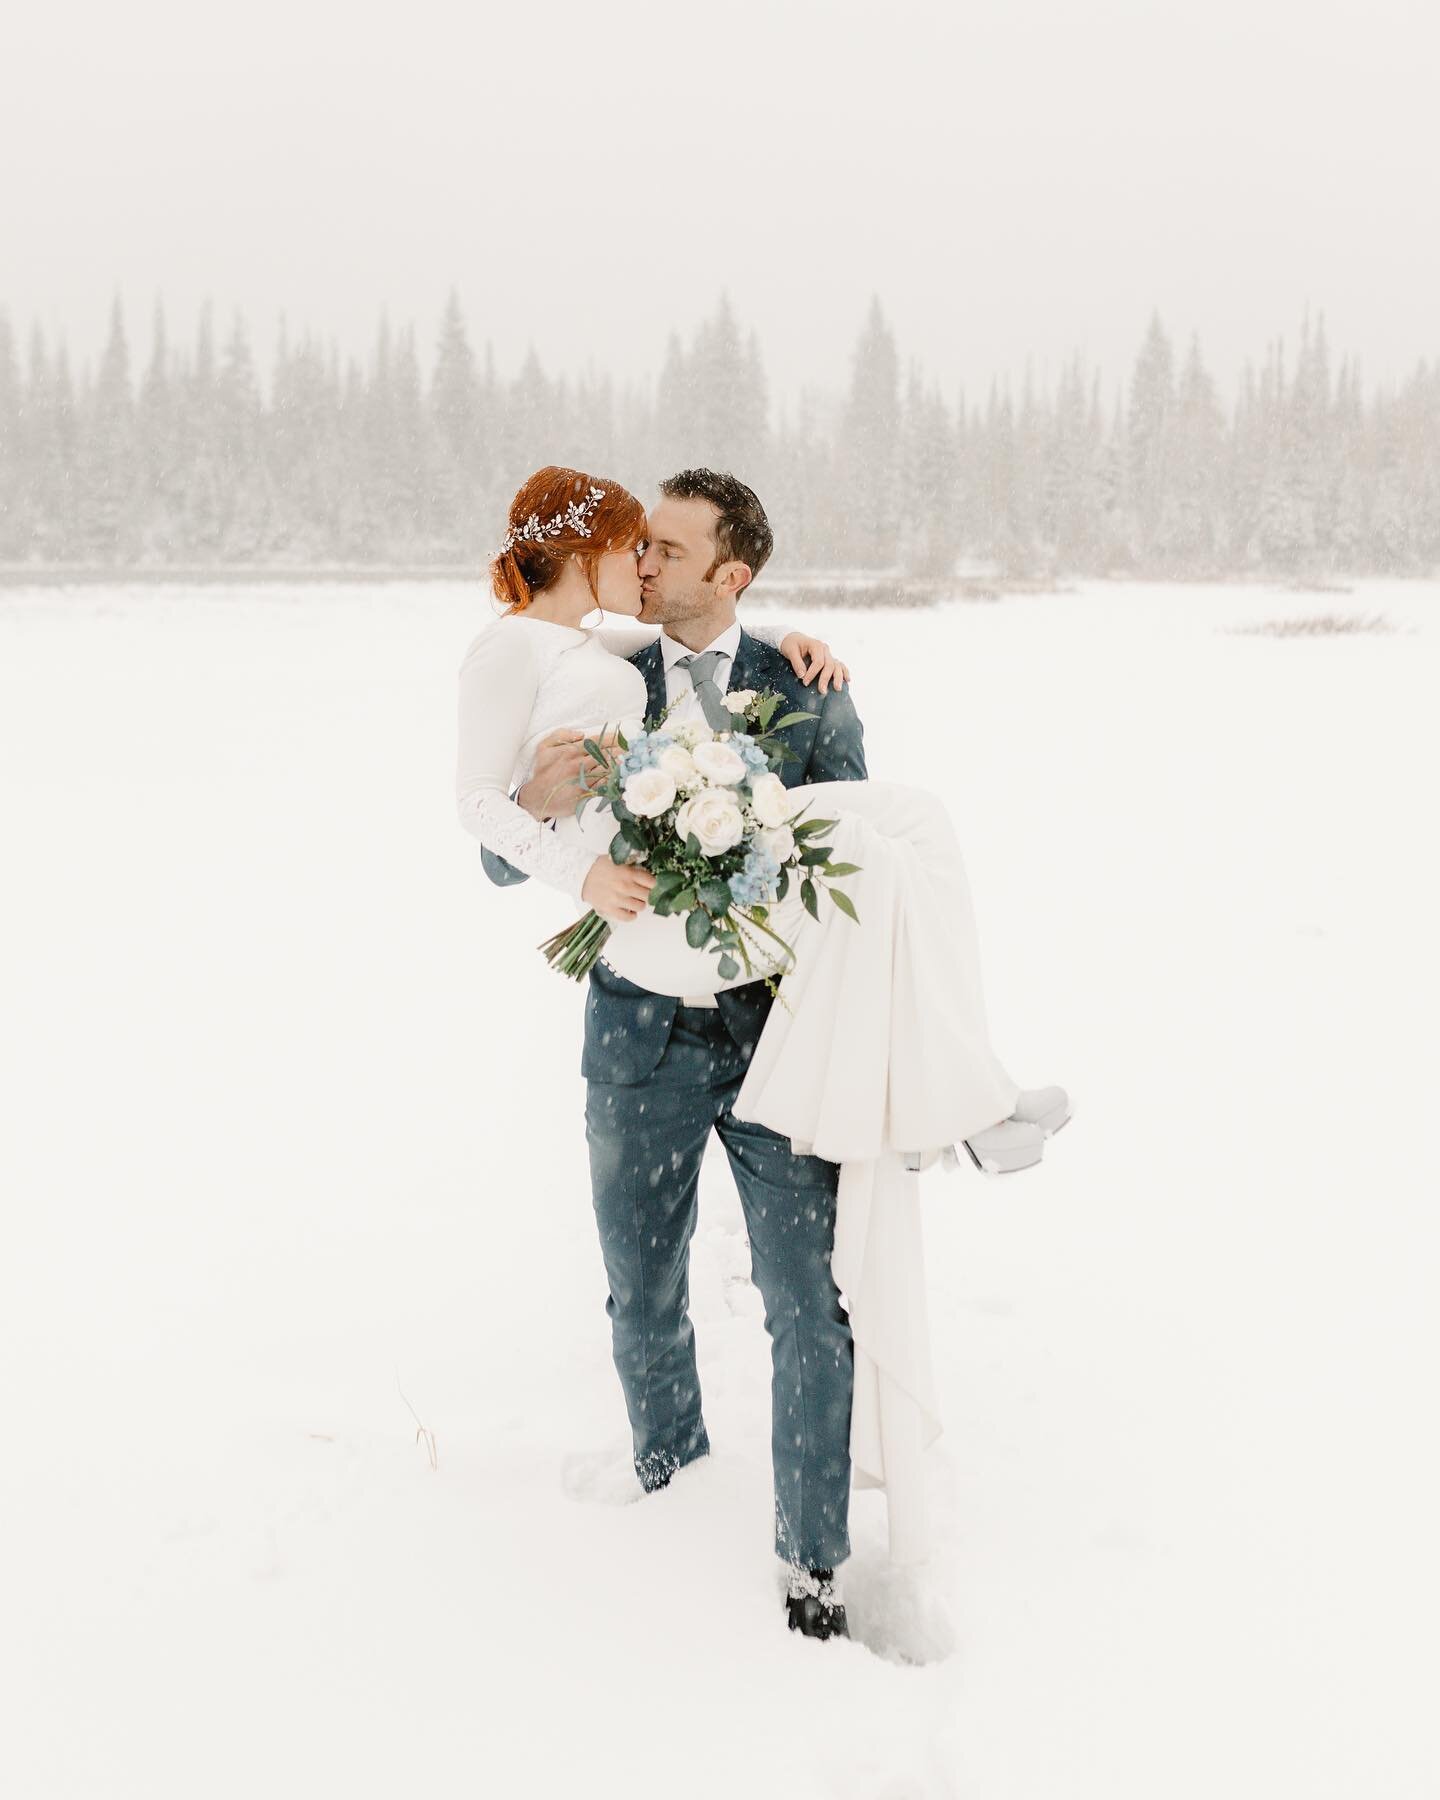 We basically got caught in a blizzard and my toes were ice cubes by the end but these pictures are 1000% worth it! 😍😍😍